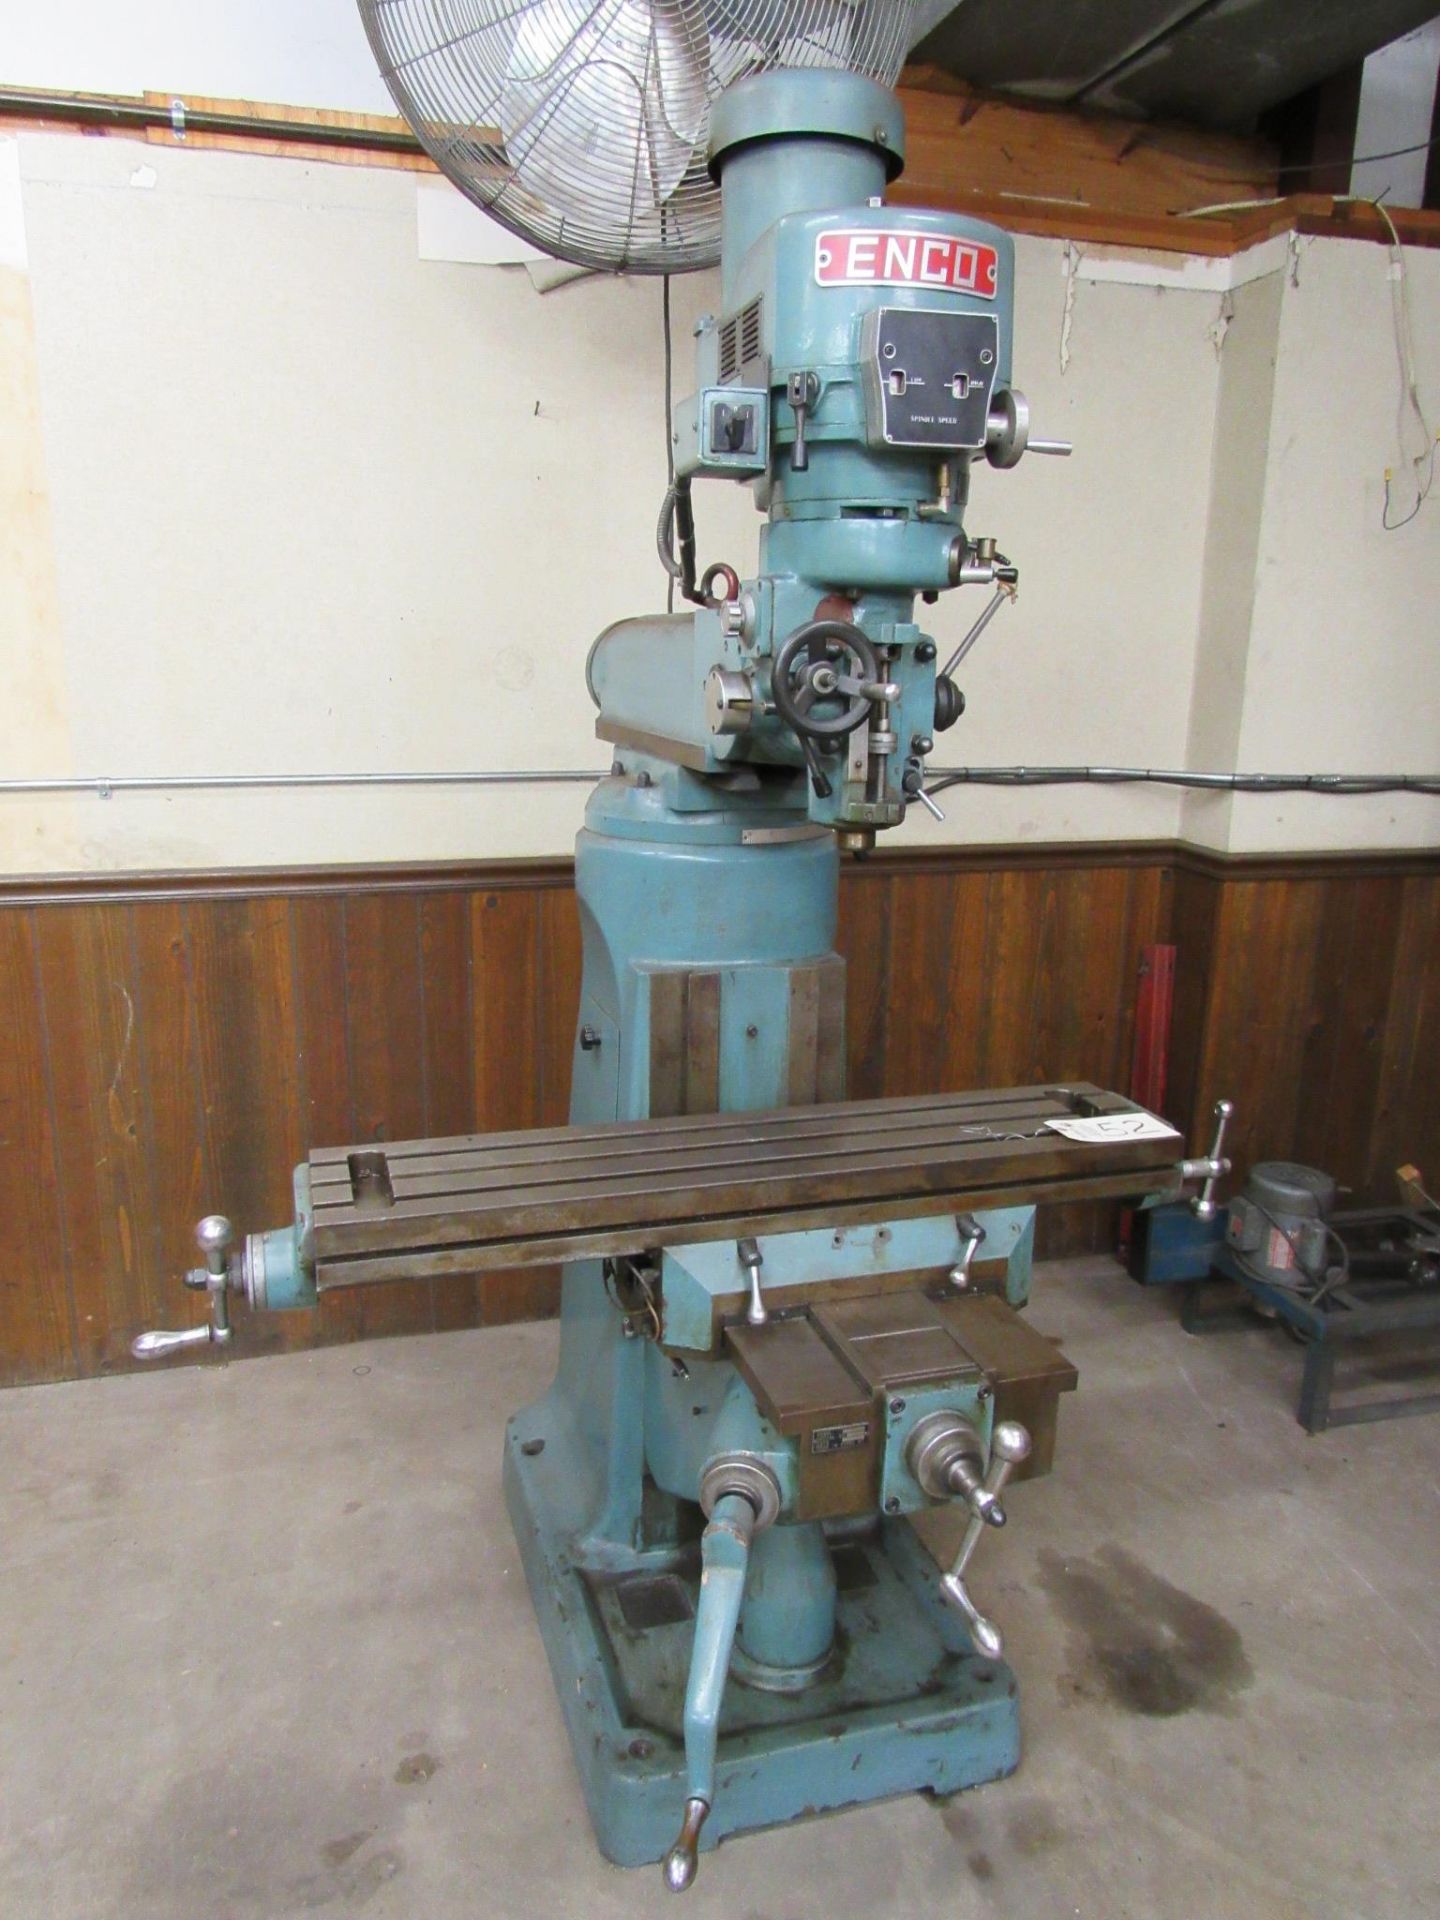 Enco Variable Speed Vertical Knee Mill with 9'' x 42'' Table, R-8 Spindle Speeds Variable to 2800 - Image 2 of 6